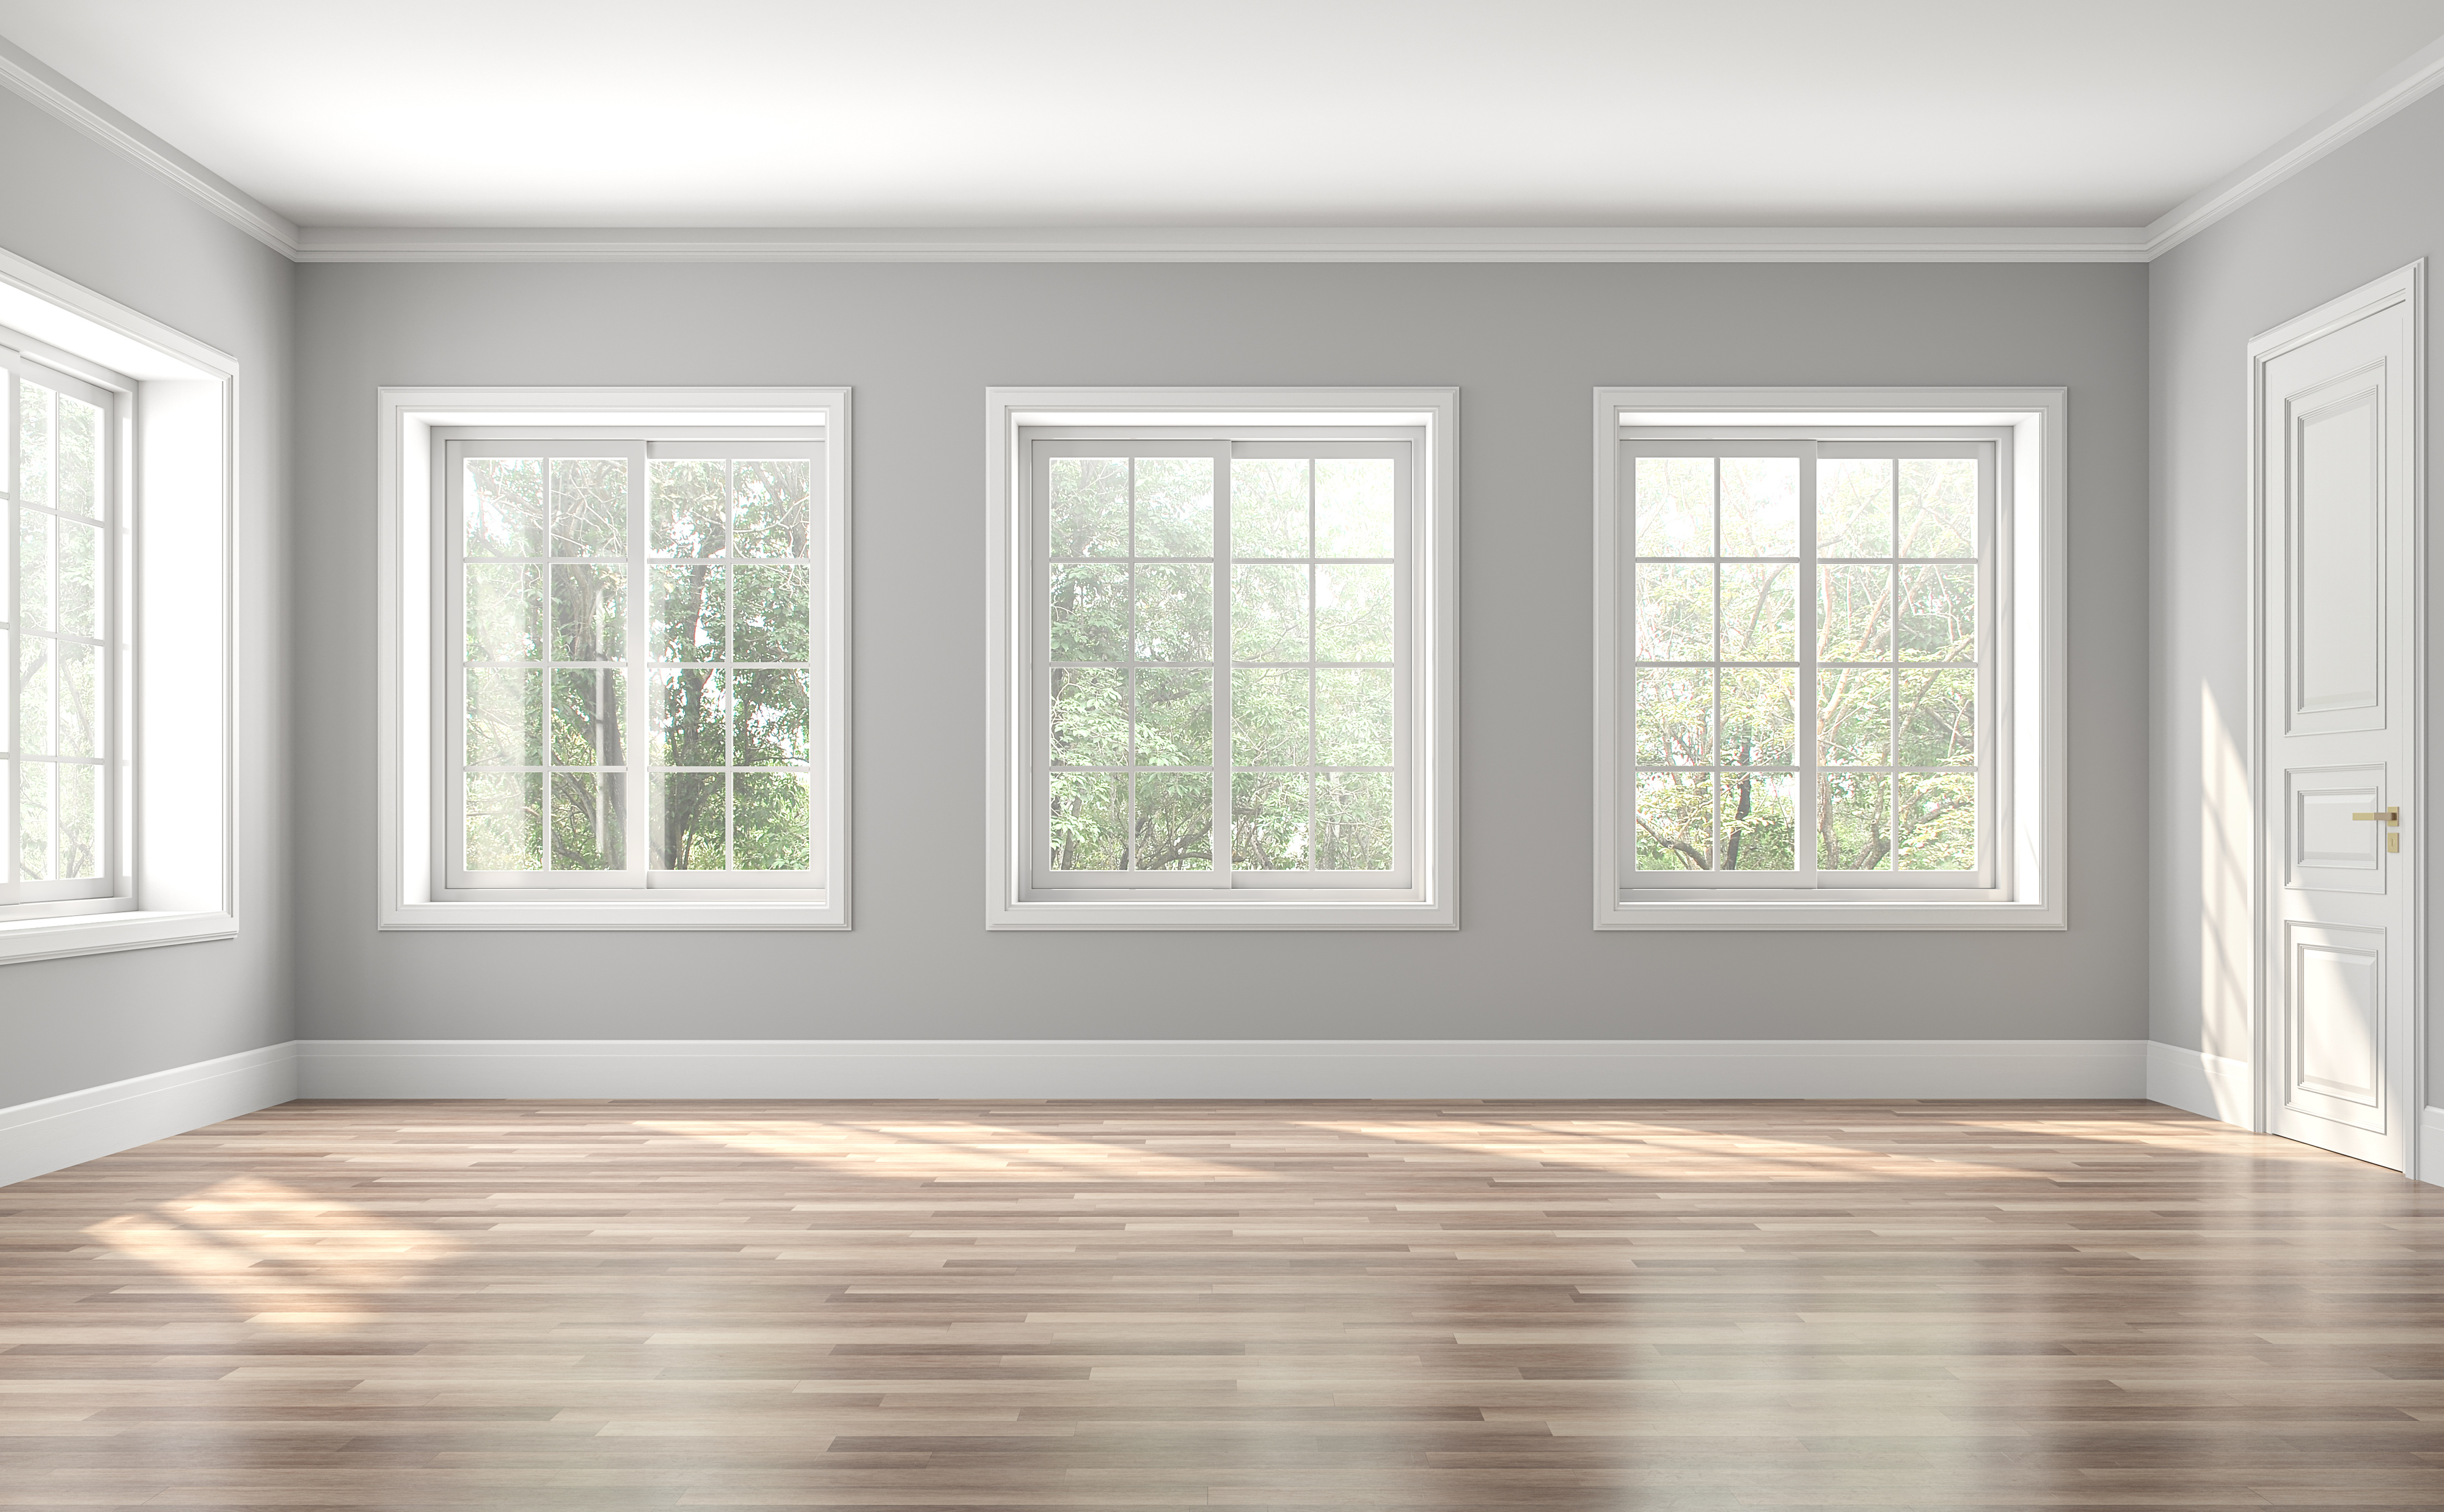 An empty room with gray walls and four windows